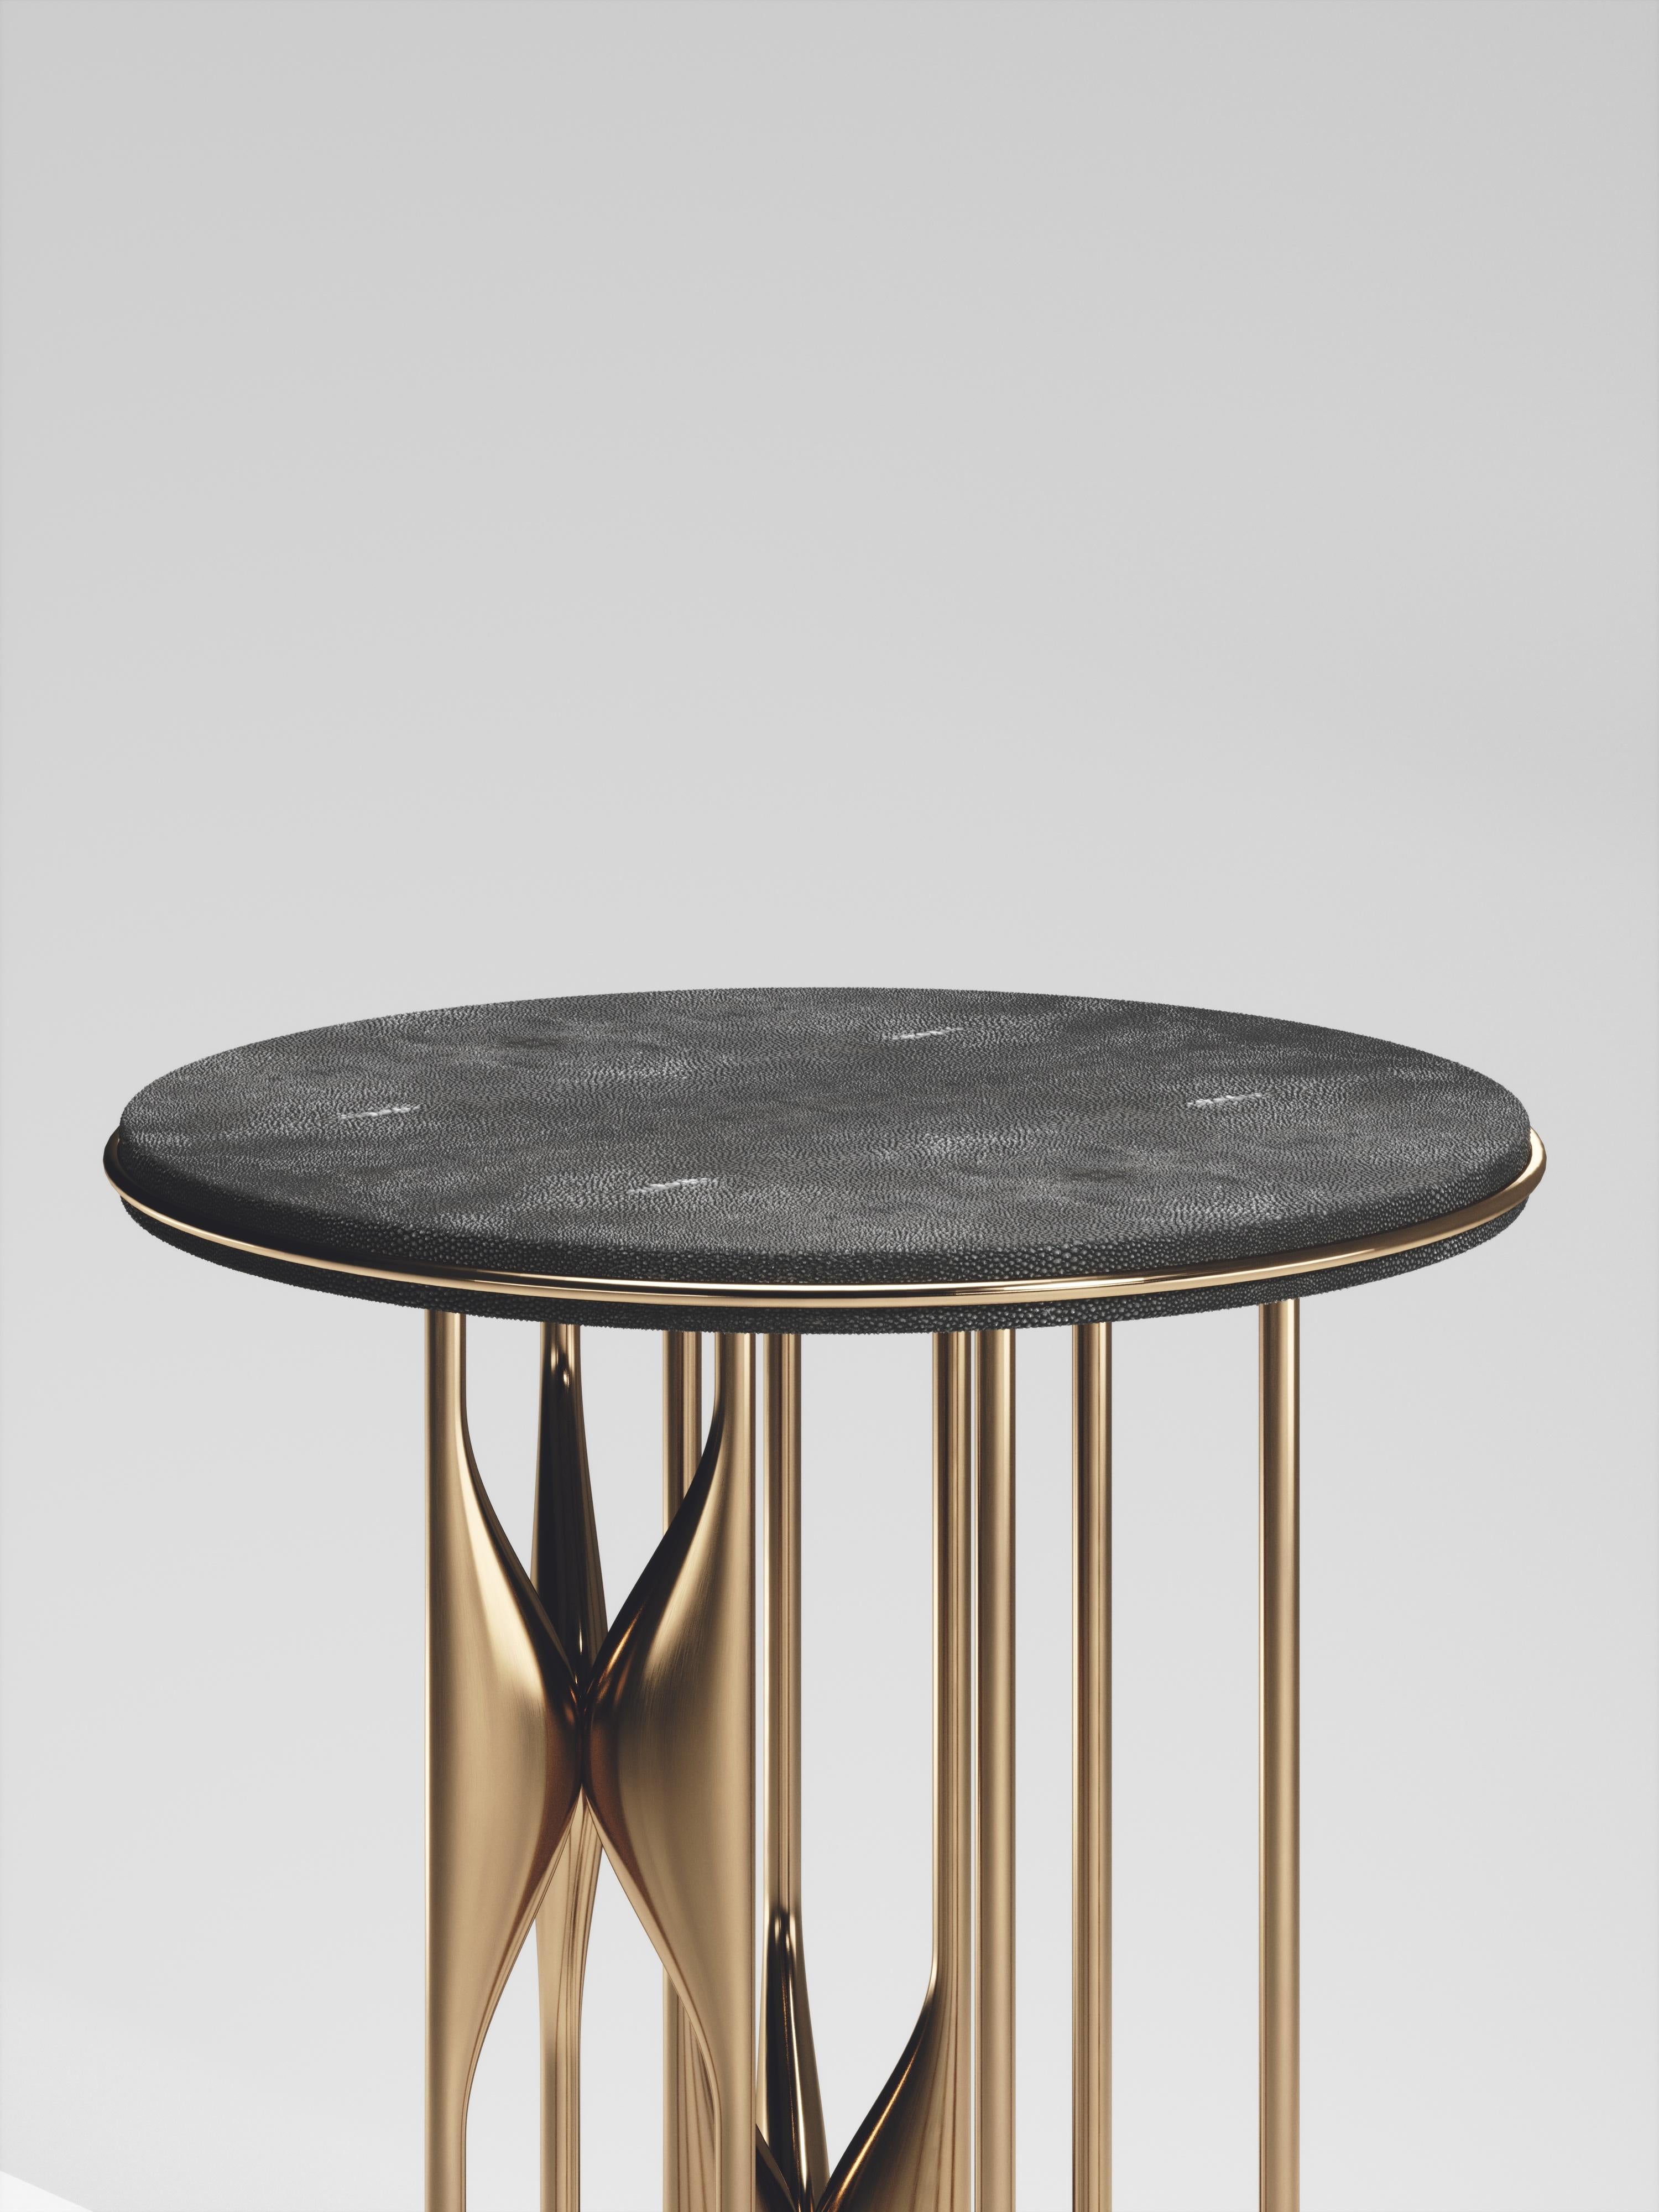 The Plumeria side table by Kifu Paris is a dramatic and sculptural piece. The coal black shagreen inlaid top sits on clusters of bronze-patina brass legs that are conceptually inspired by bird feathers floating on top of a lake. The border of the